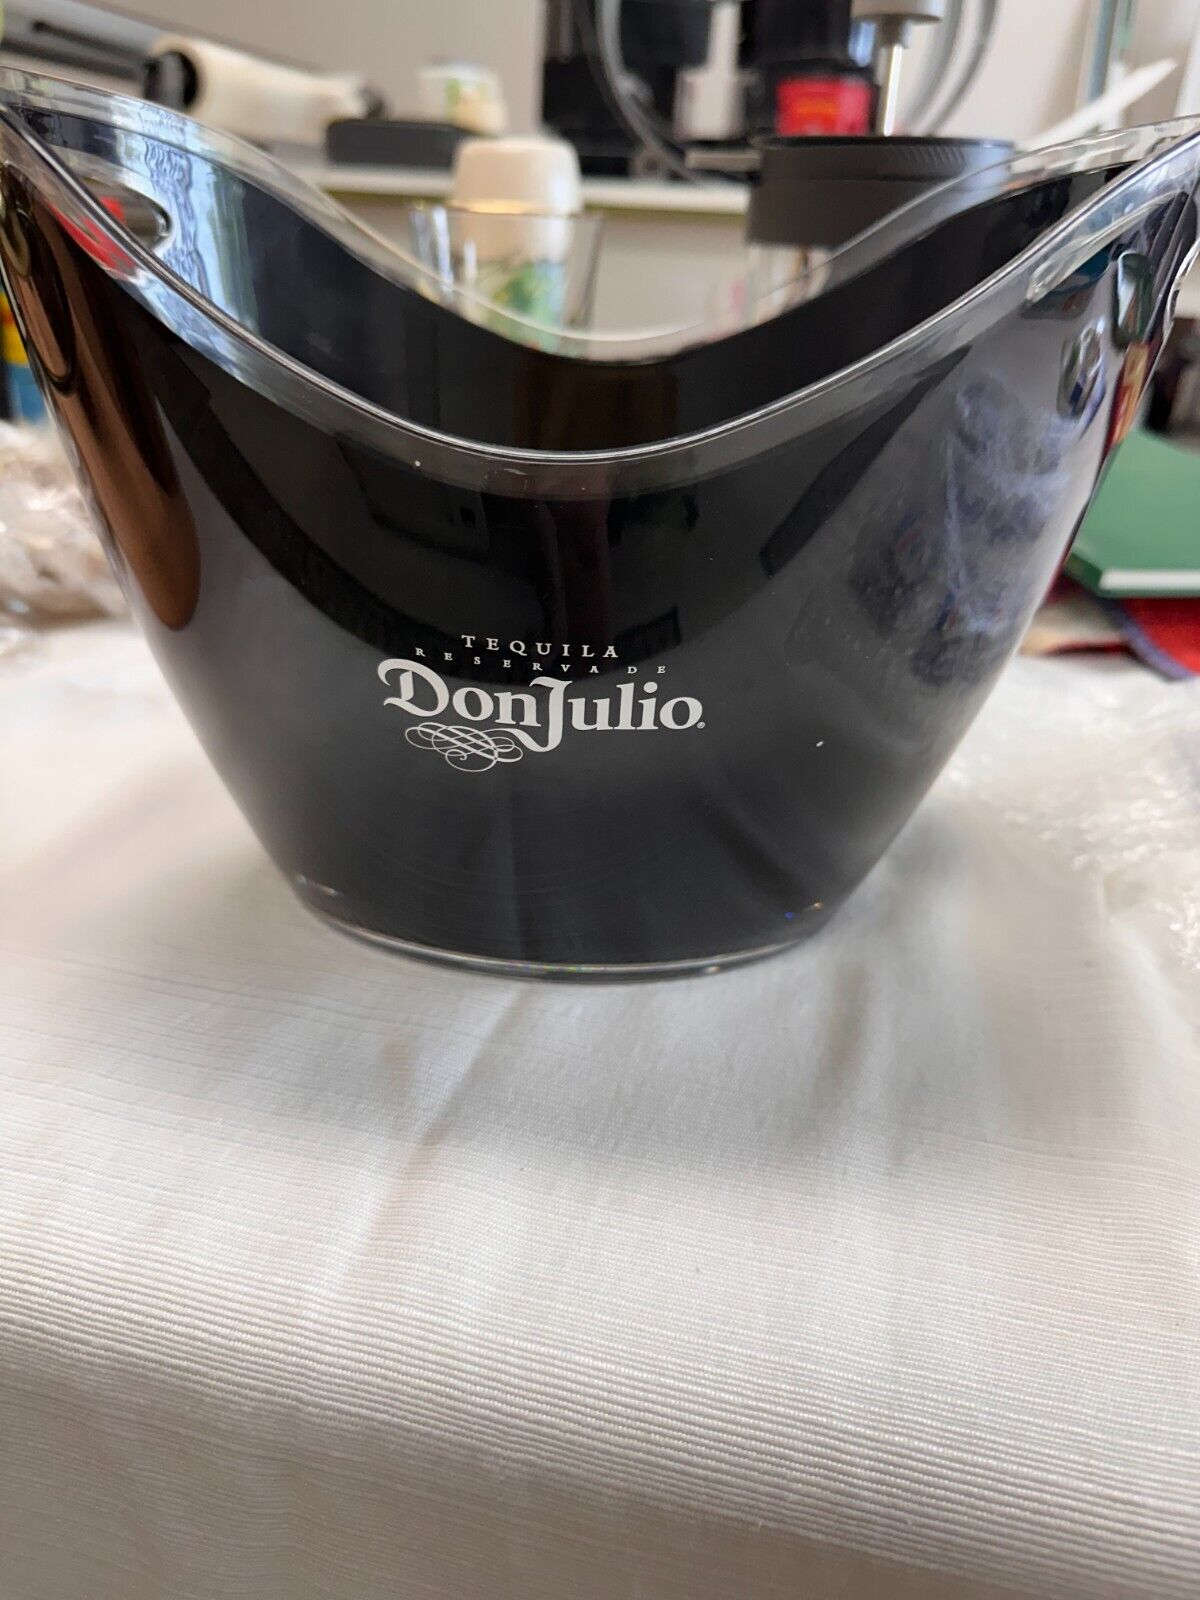 Don Julio Tequila Brand NEW Acrylic Bottle Service Ice Bucket Bottle Chill